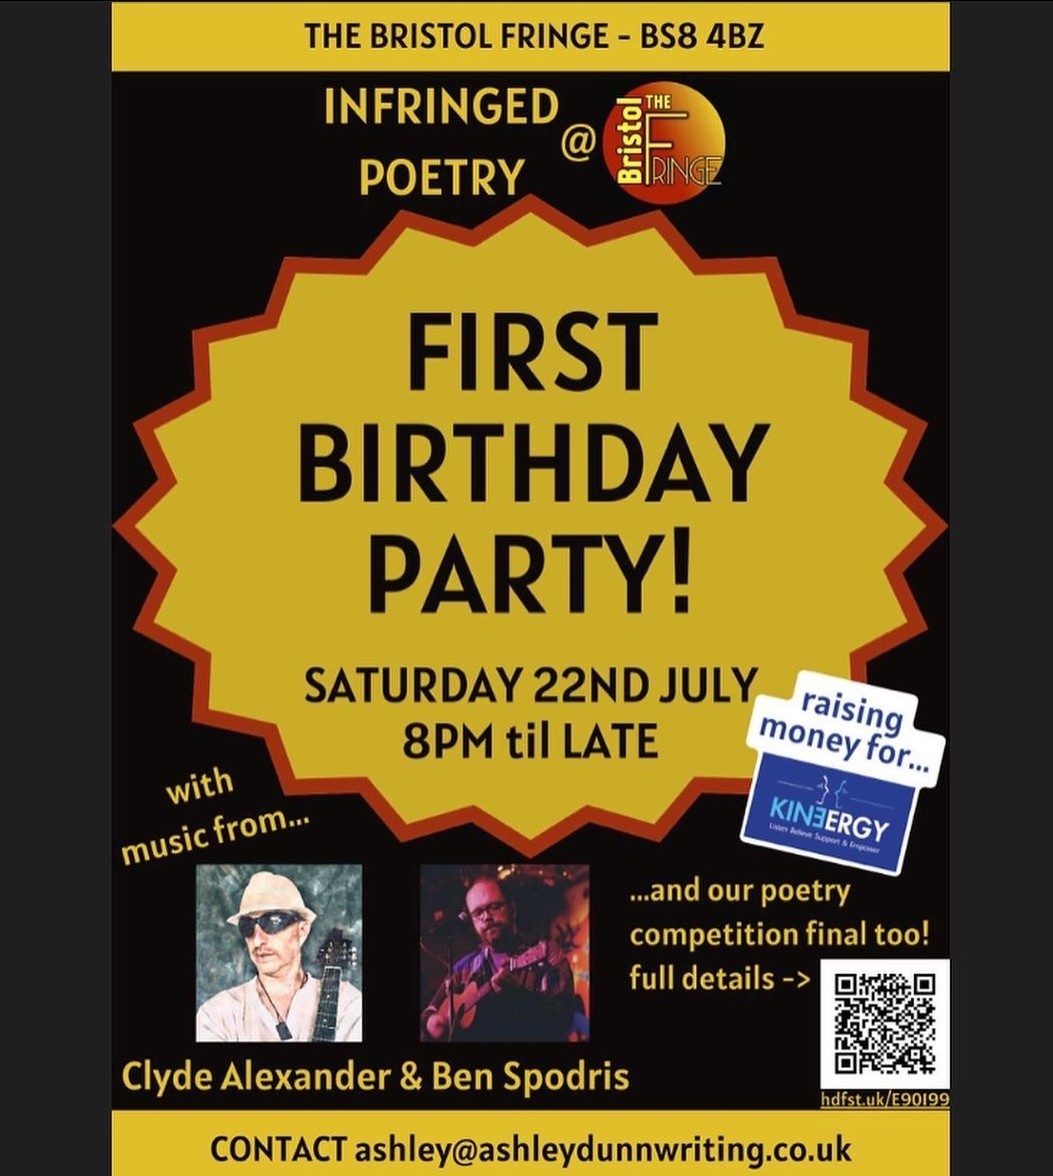 This Saturday is the Infringed Poetry 1st Birthday Party! 
Starting at 8pm, the evening will include live music and a poetry competition, with donations being collected on the night for Kinergy. 
Saturday 22nd July - The Bristol Fringe - BS8 4BZ https://t.co/kBFttrXYCu